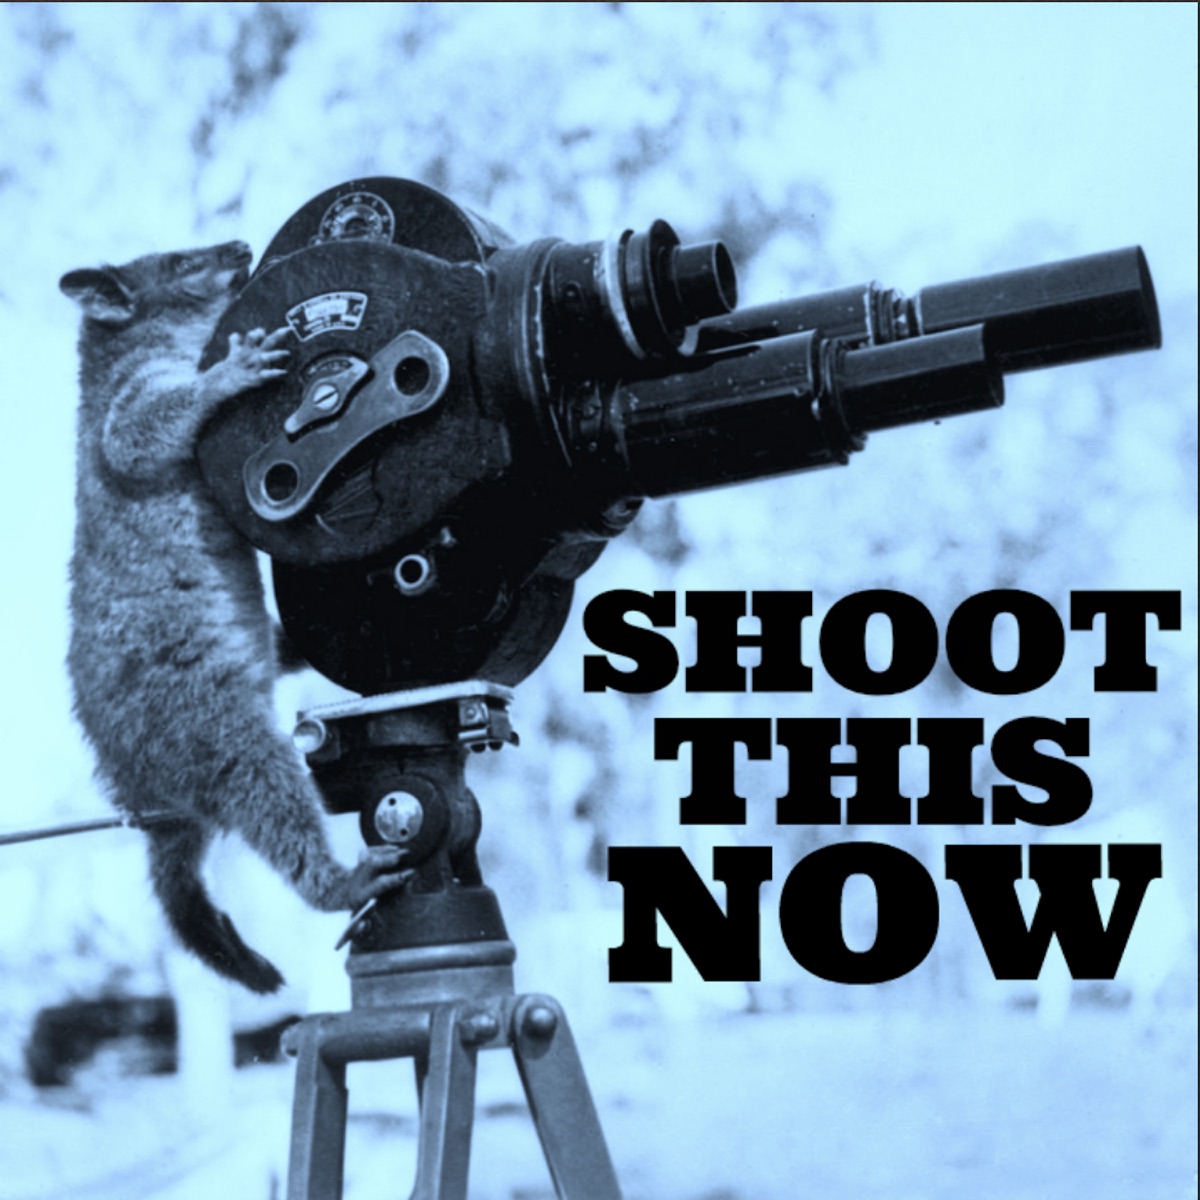 Fat Nudist Resort - The Barry Rothbart Nudist Videographer Story â€“ Shoot This Now â€“ Podcast â€“  Podtail